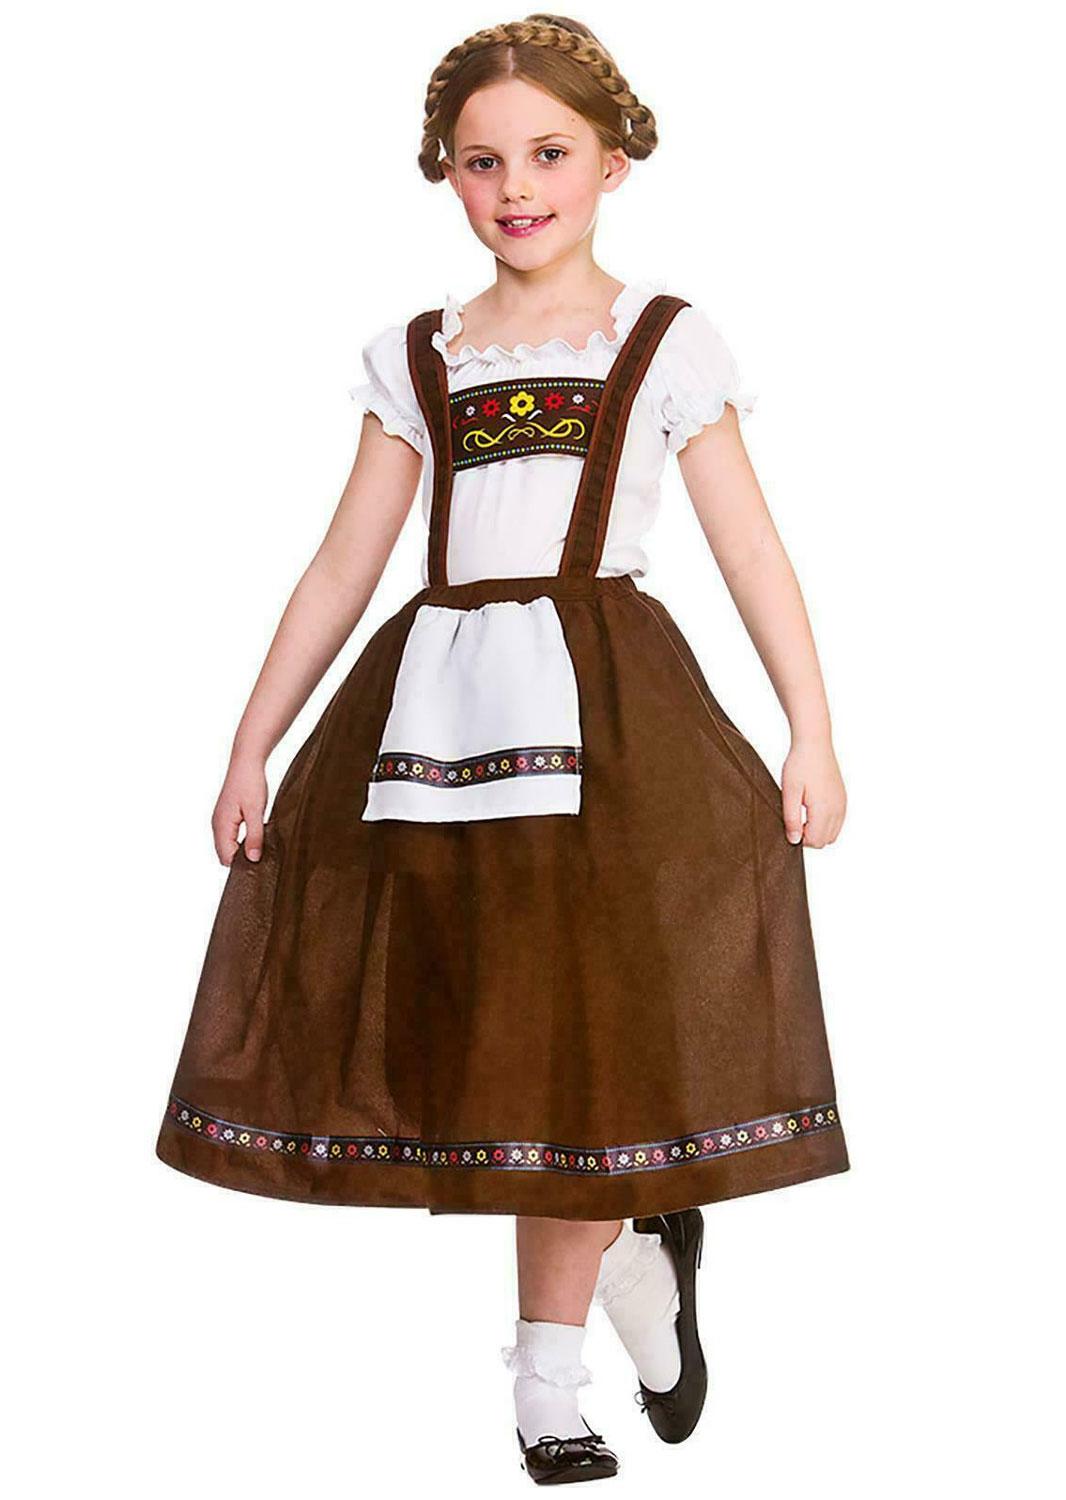 Bavarian Girl Oktoberfest Fancy Dress Costume by Wicked EG3637 available here at Karnival Costyumes online party shop